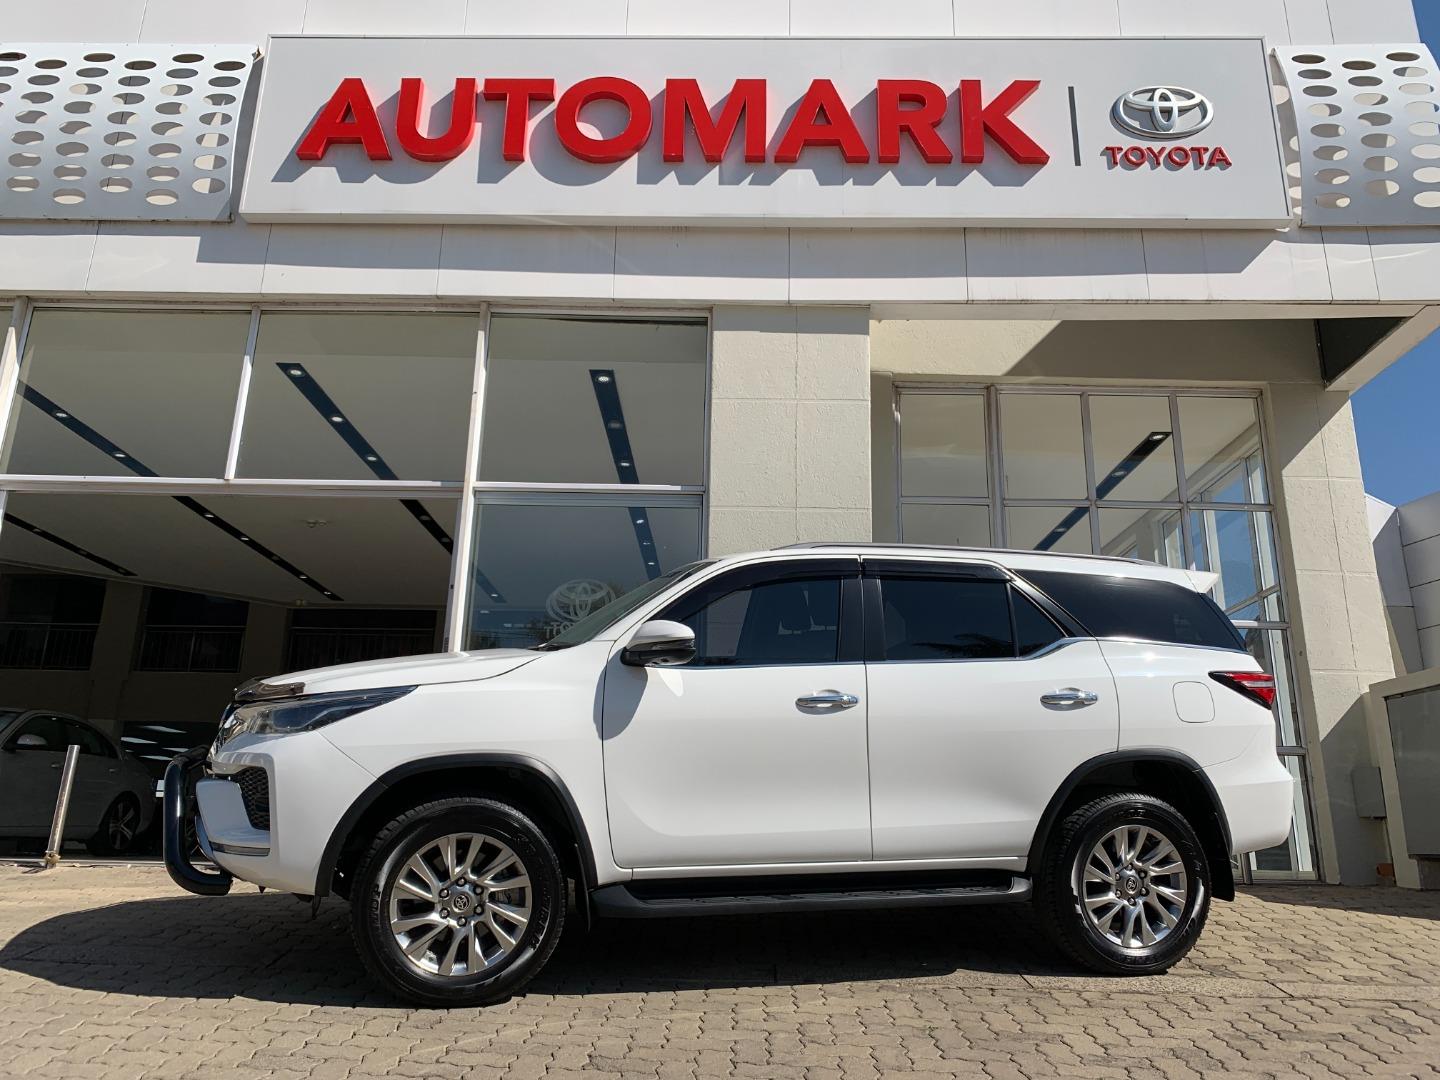 2022 Toyota Fortuner MY21.9 2.8 Gd-6 Raised bodytype Vx At for sale - 342741